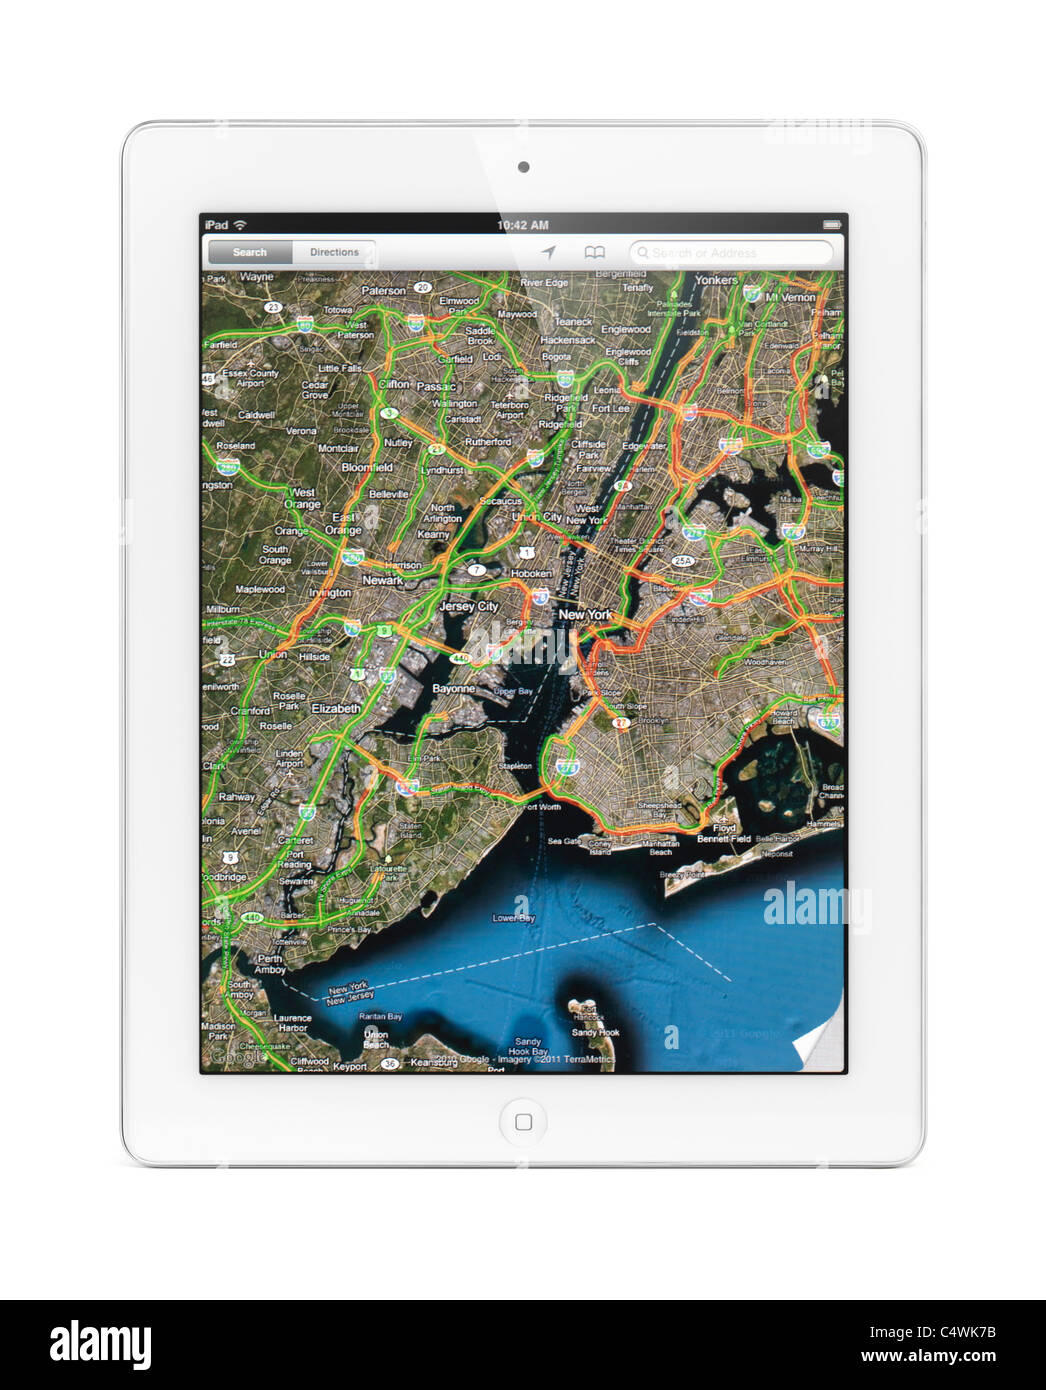 Apple iPad 2 tablet computer displaying a map of New York with traffic by Google Maps on its screen Isolated on white background Stock Photo